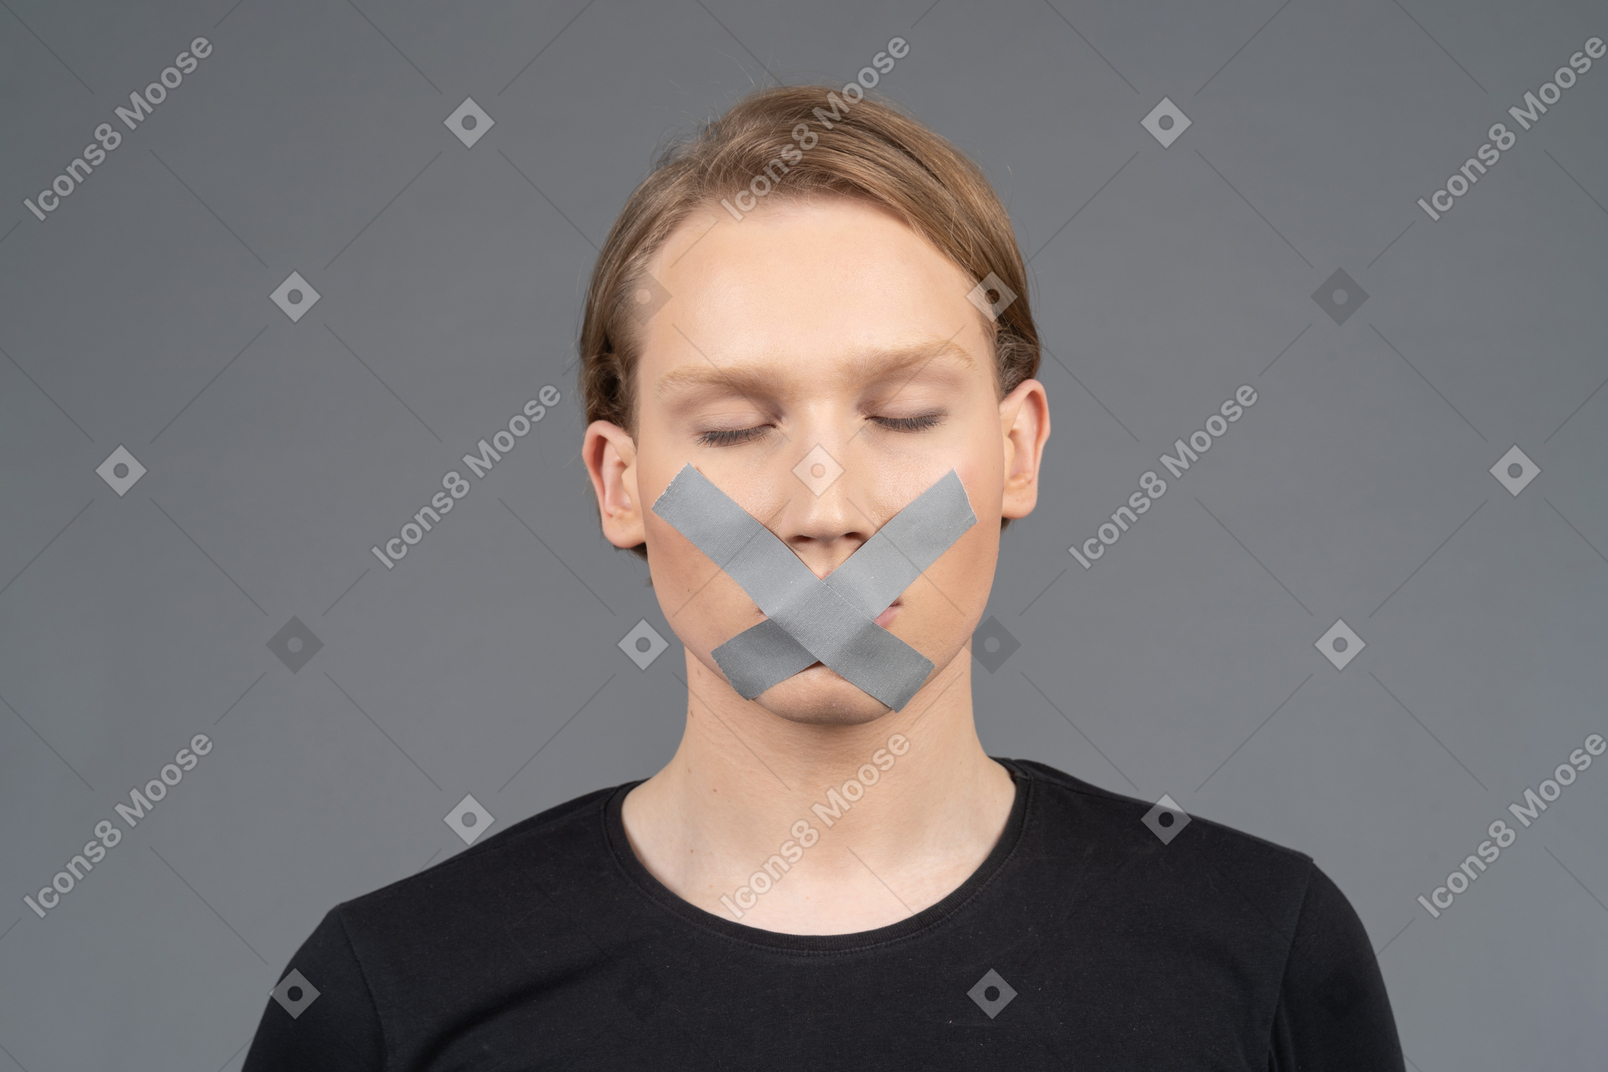 Person with duct tape on mouth and eyes closed